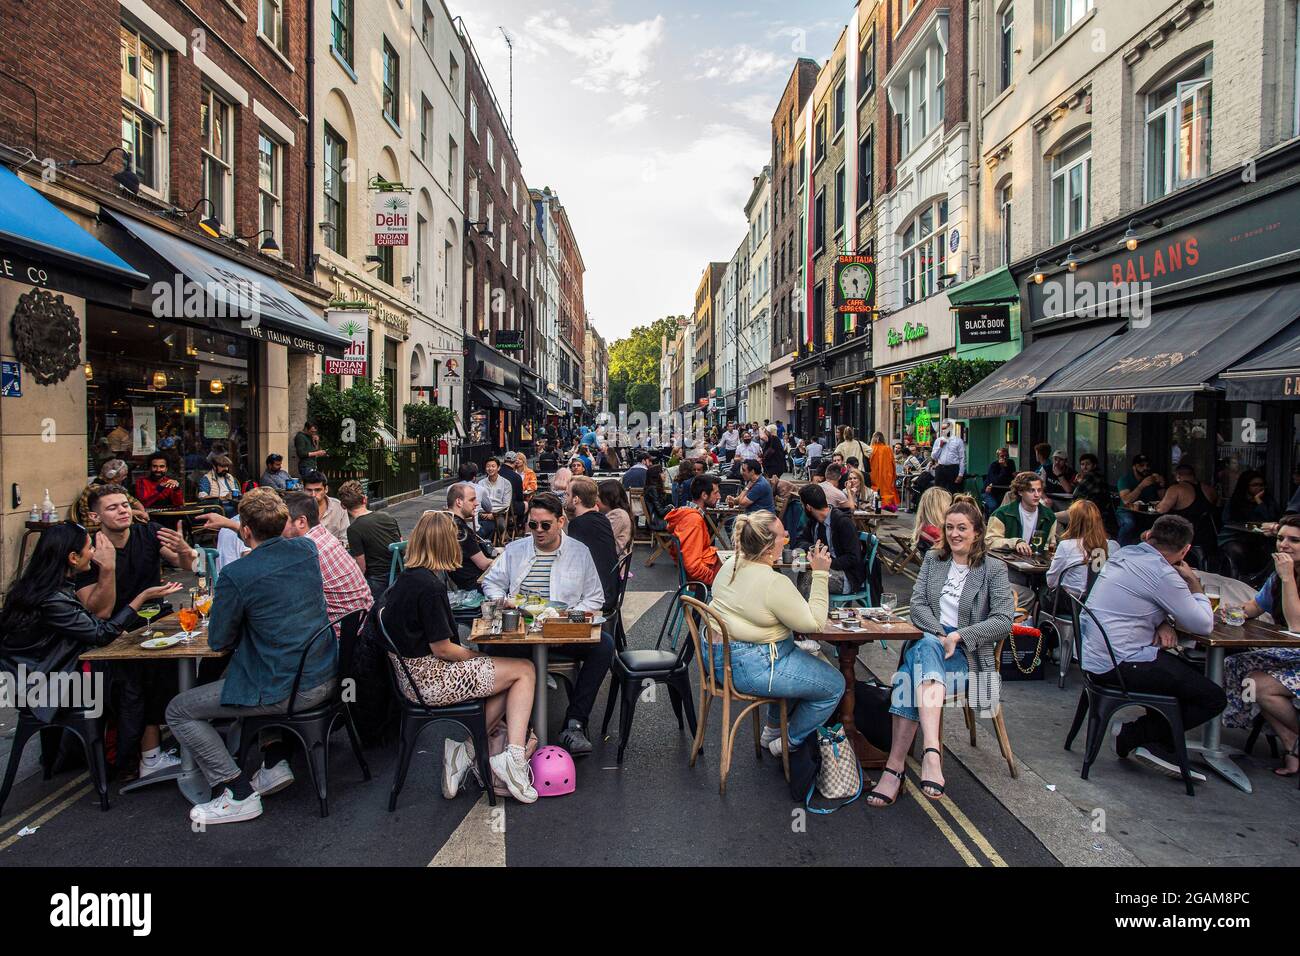 People eating on restaurant tables placed outside on Frith Street in Soho, London, UK Stock Photo